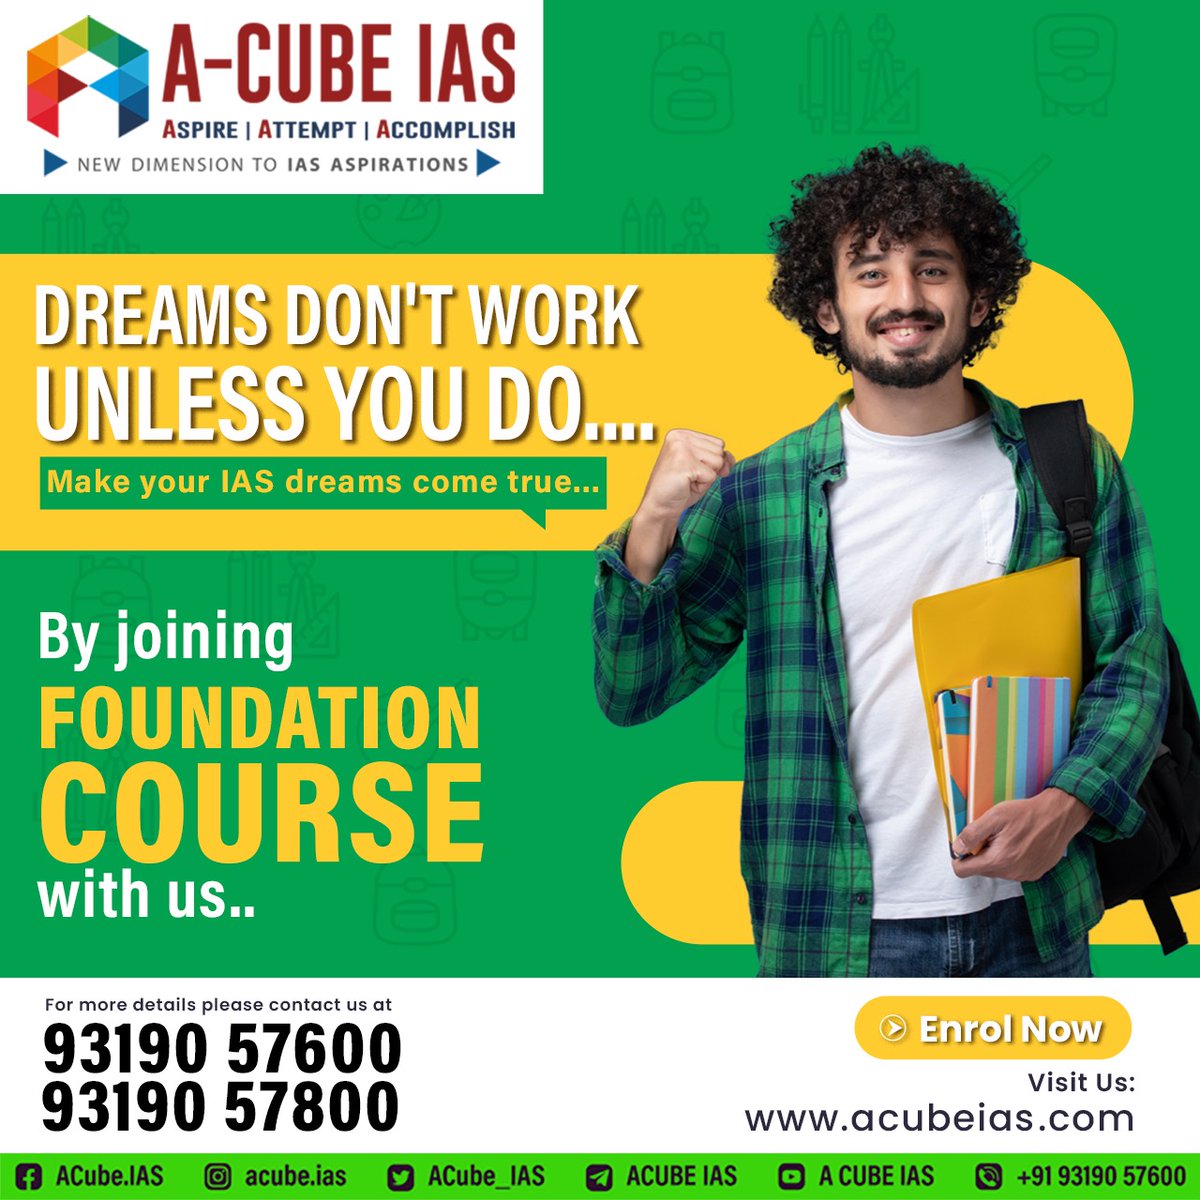 DREAMS DON'T WORK
UNLESS YOU DO....

Make your IAS dreams come true...

By joining Foundation Course with us..

For more details please contact us at 9319057600/800

#iasdreams #upscias #upscmotivation #prelims #upscaspirants #IAS #foundationcourse #success #iaspassion #acubeias